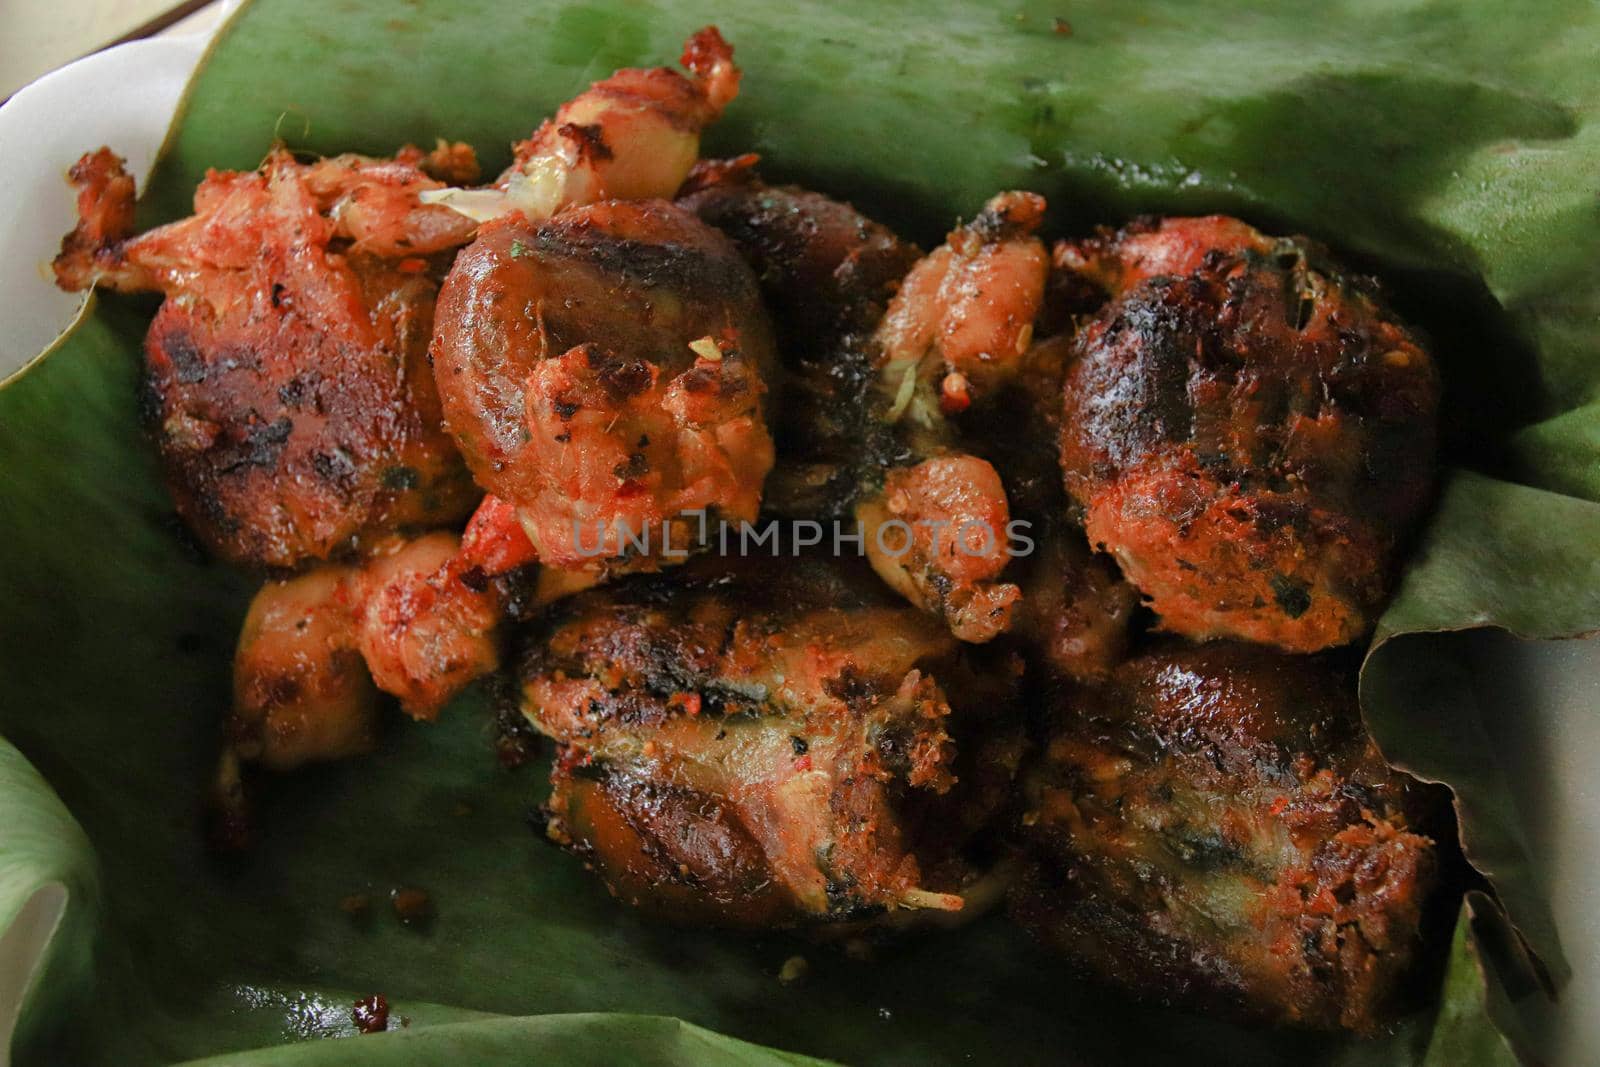 Close up of Kang Kep baob or Stuffed Frogs by Sonnet15